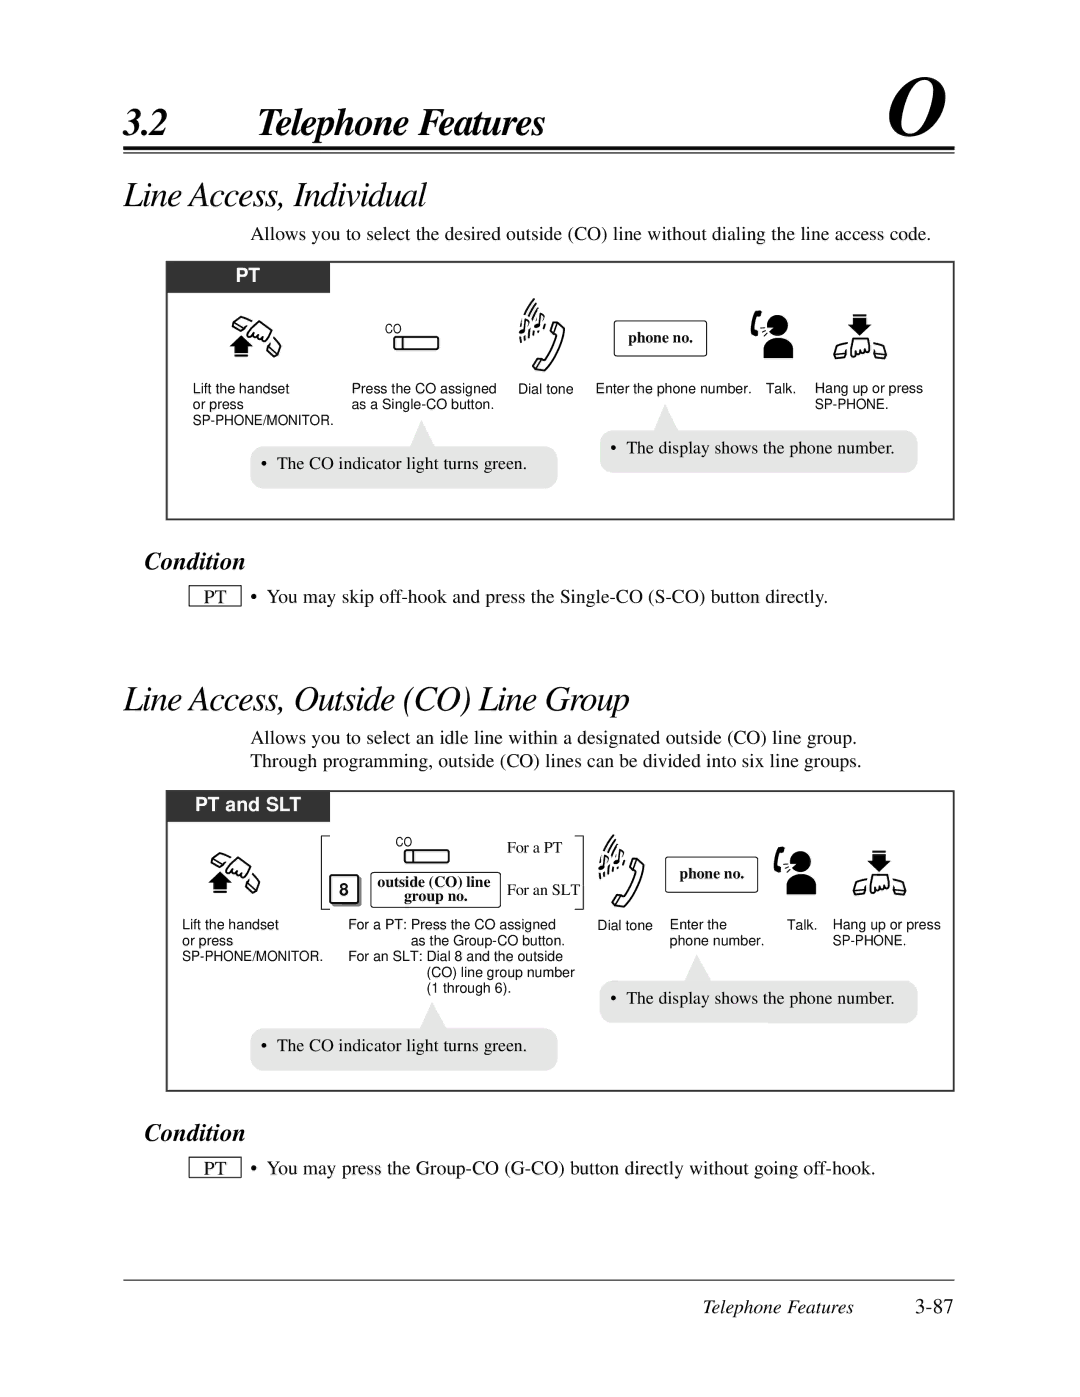 Panasonic KX-TA624 user manual Line Access, Individual, Line Access, Outside CO Line Group, For a PT, For an SLT 